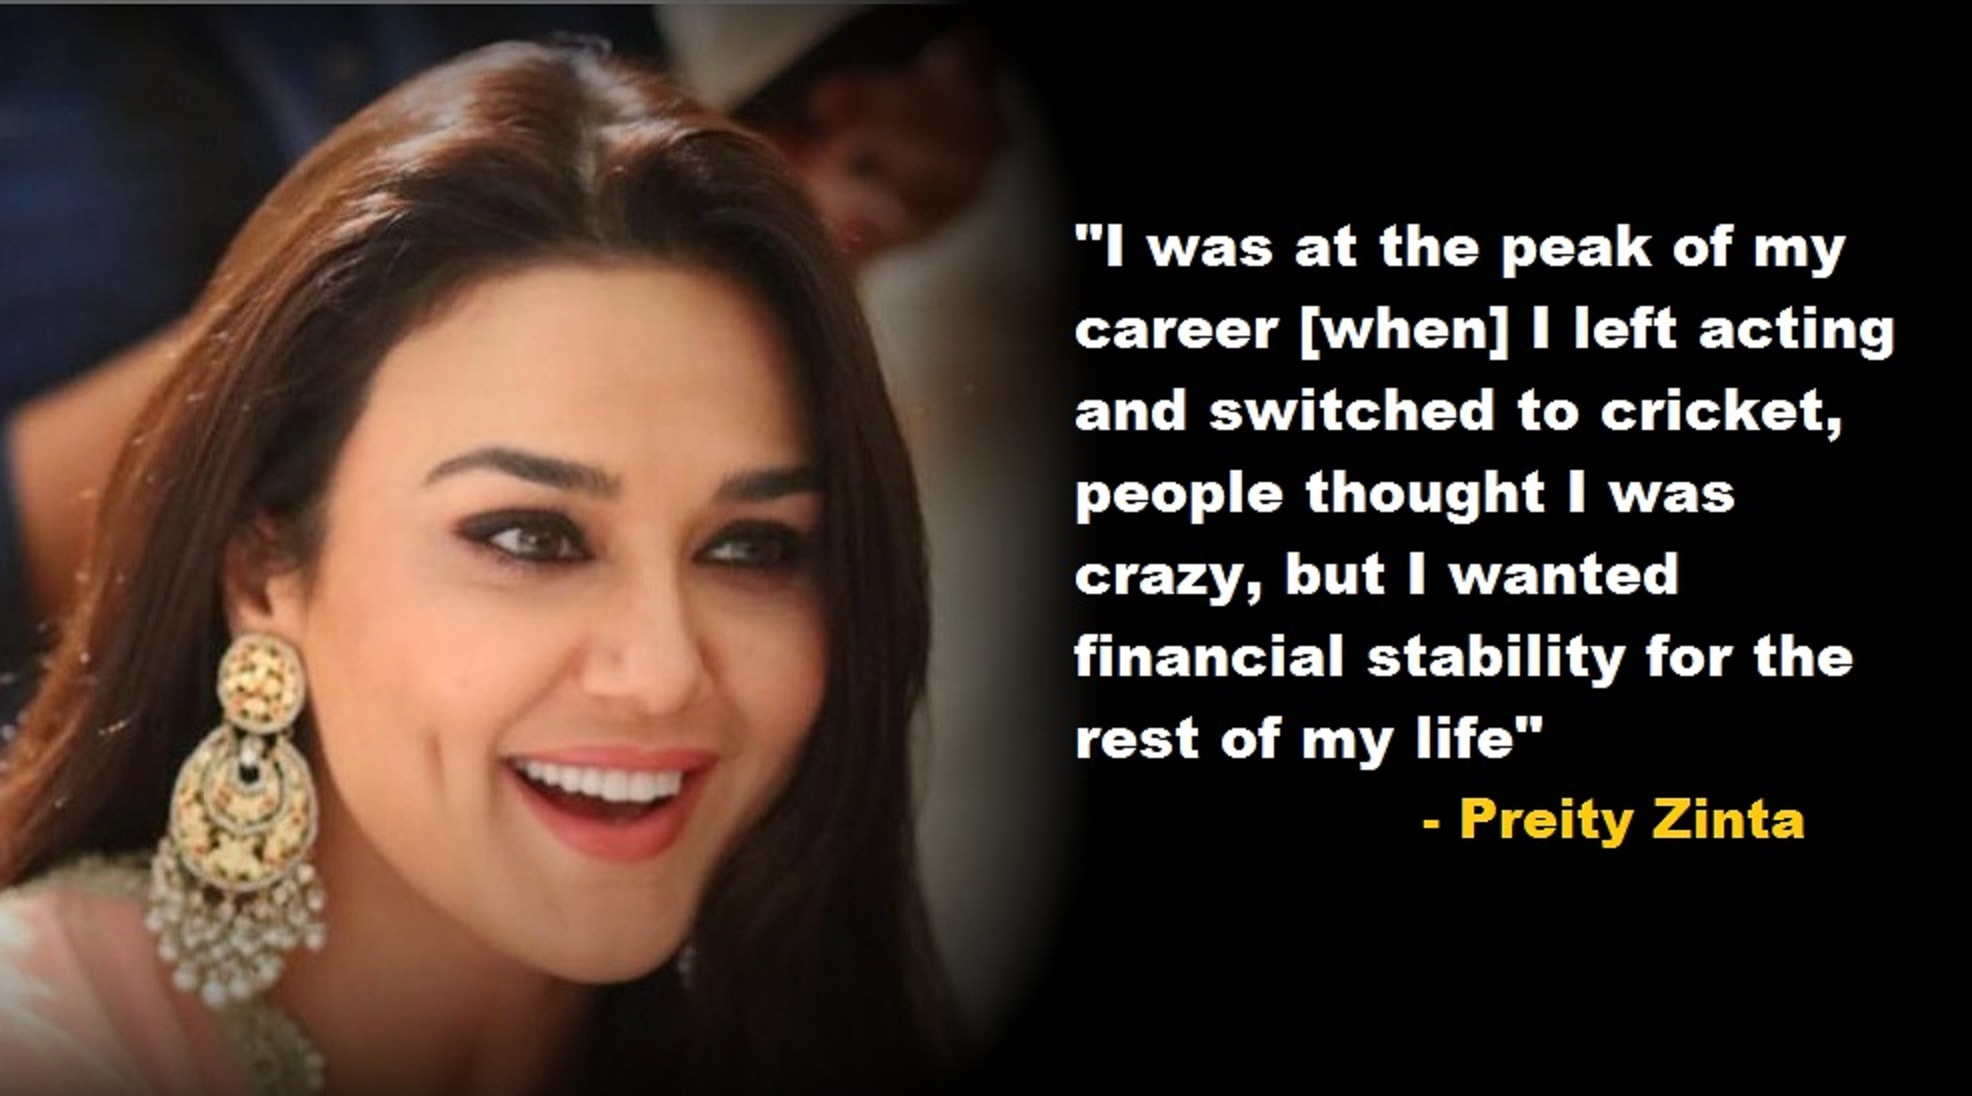 Preity Zinta Speaks On Her Comeback And Reveals Why She Left Bollywood Back Then